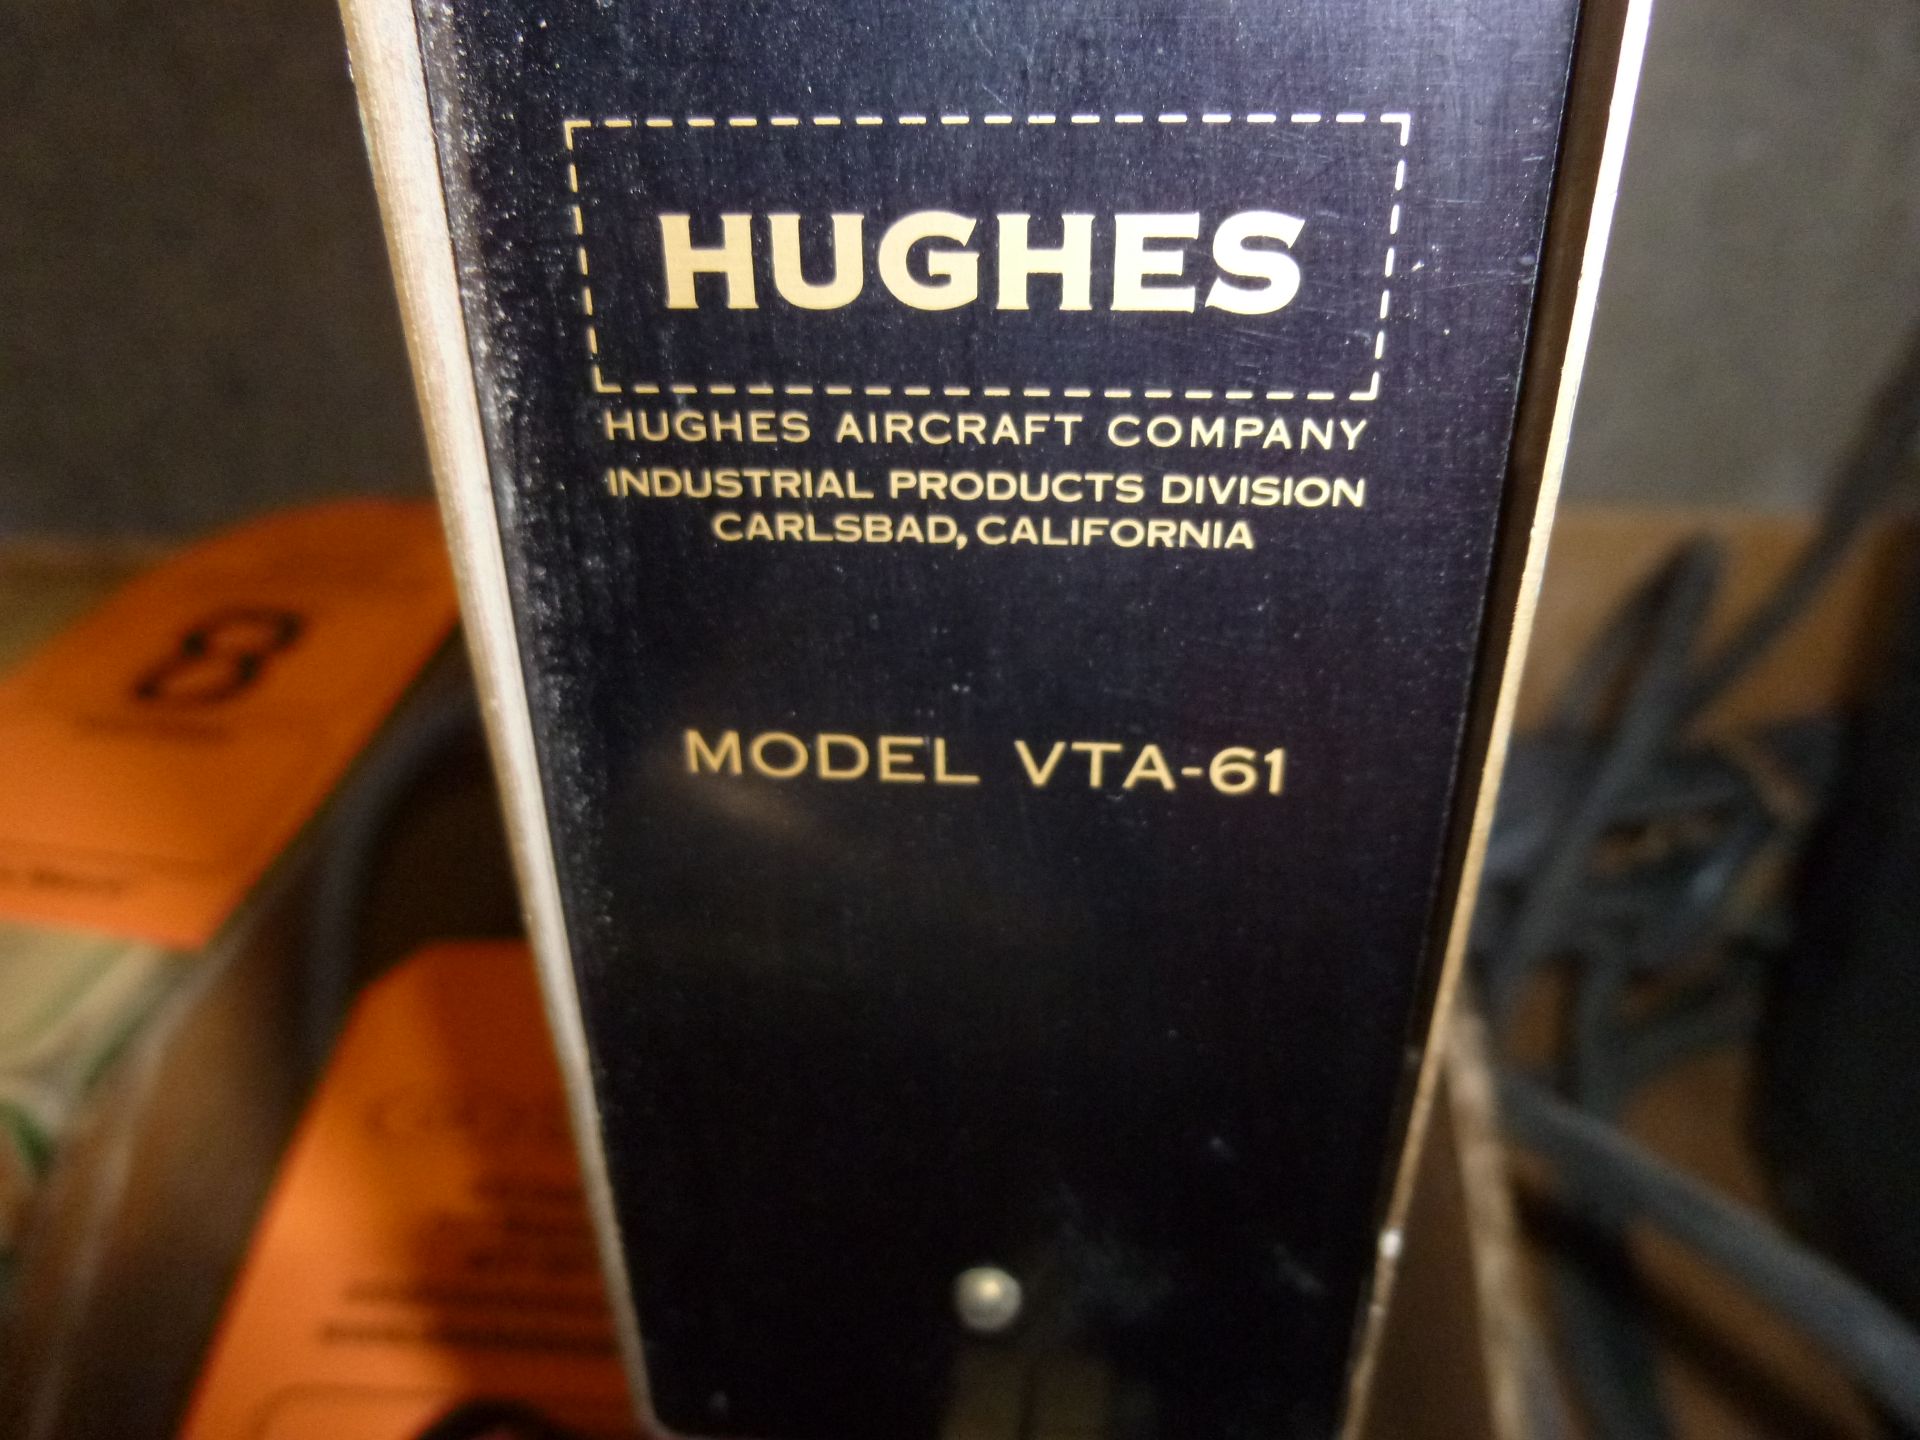 Hughes Model VTA-61 precision spot welder, as always with Brolyn LLC auctions, all lots can be - Image 3 of 3